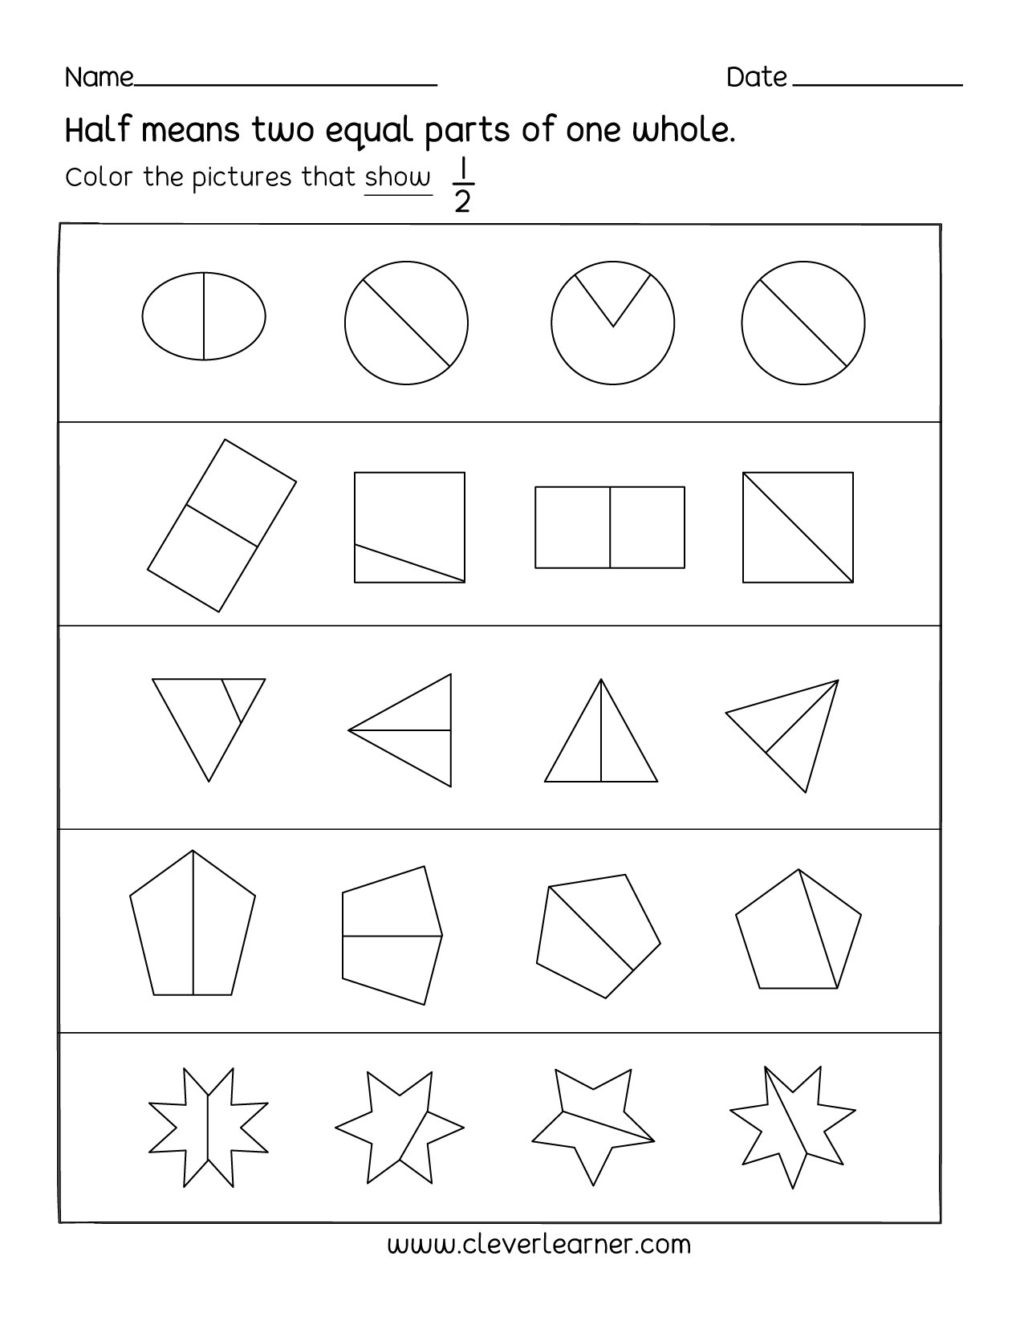 Free Fall Problems Worksheet Worksheet Fun Activity Fractions Half Worksheets for